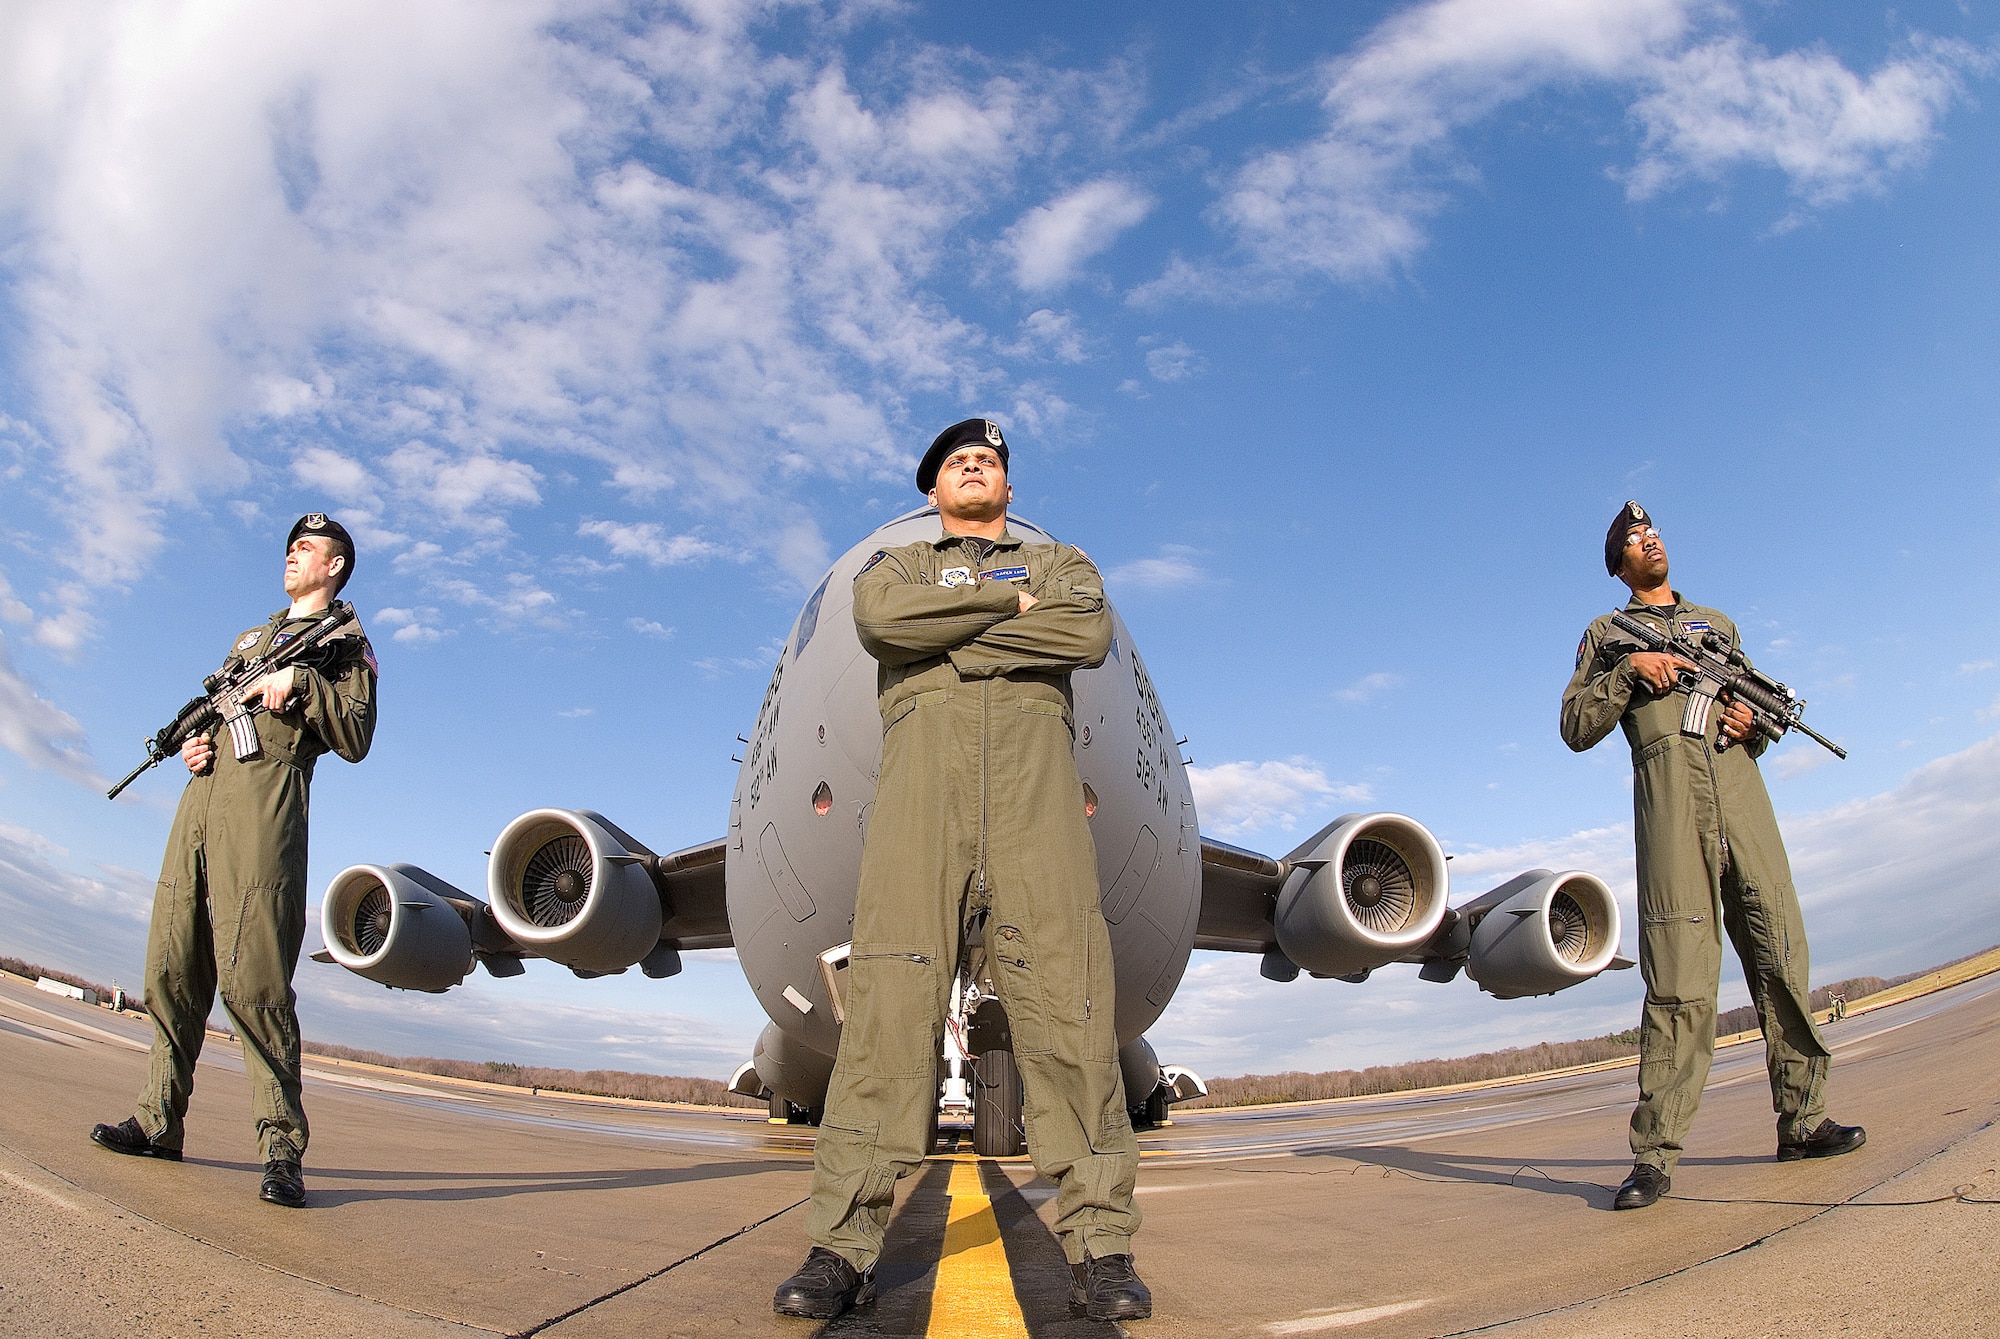 Airman 1st Class James New, Tech. Sgt. Michael Hernandez and Airman 1st Class Jovanny Reyes, 436th Security Forces Squadron Ravens, stand guard in front of a C-17 Jan. 11 on the flightline at Dover Air Force Base. (U.S. Air Force photo/ Roland Balik)